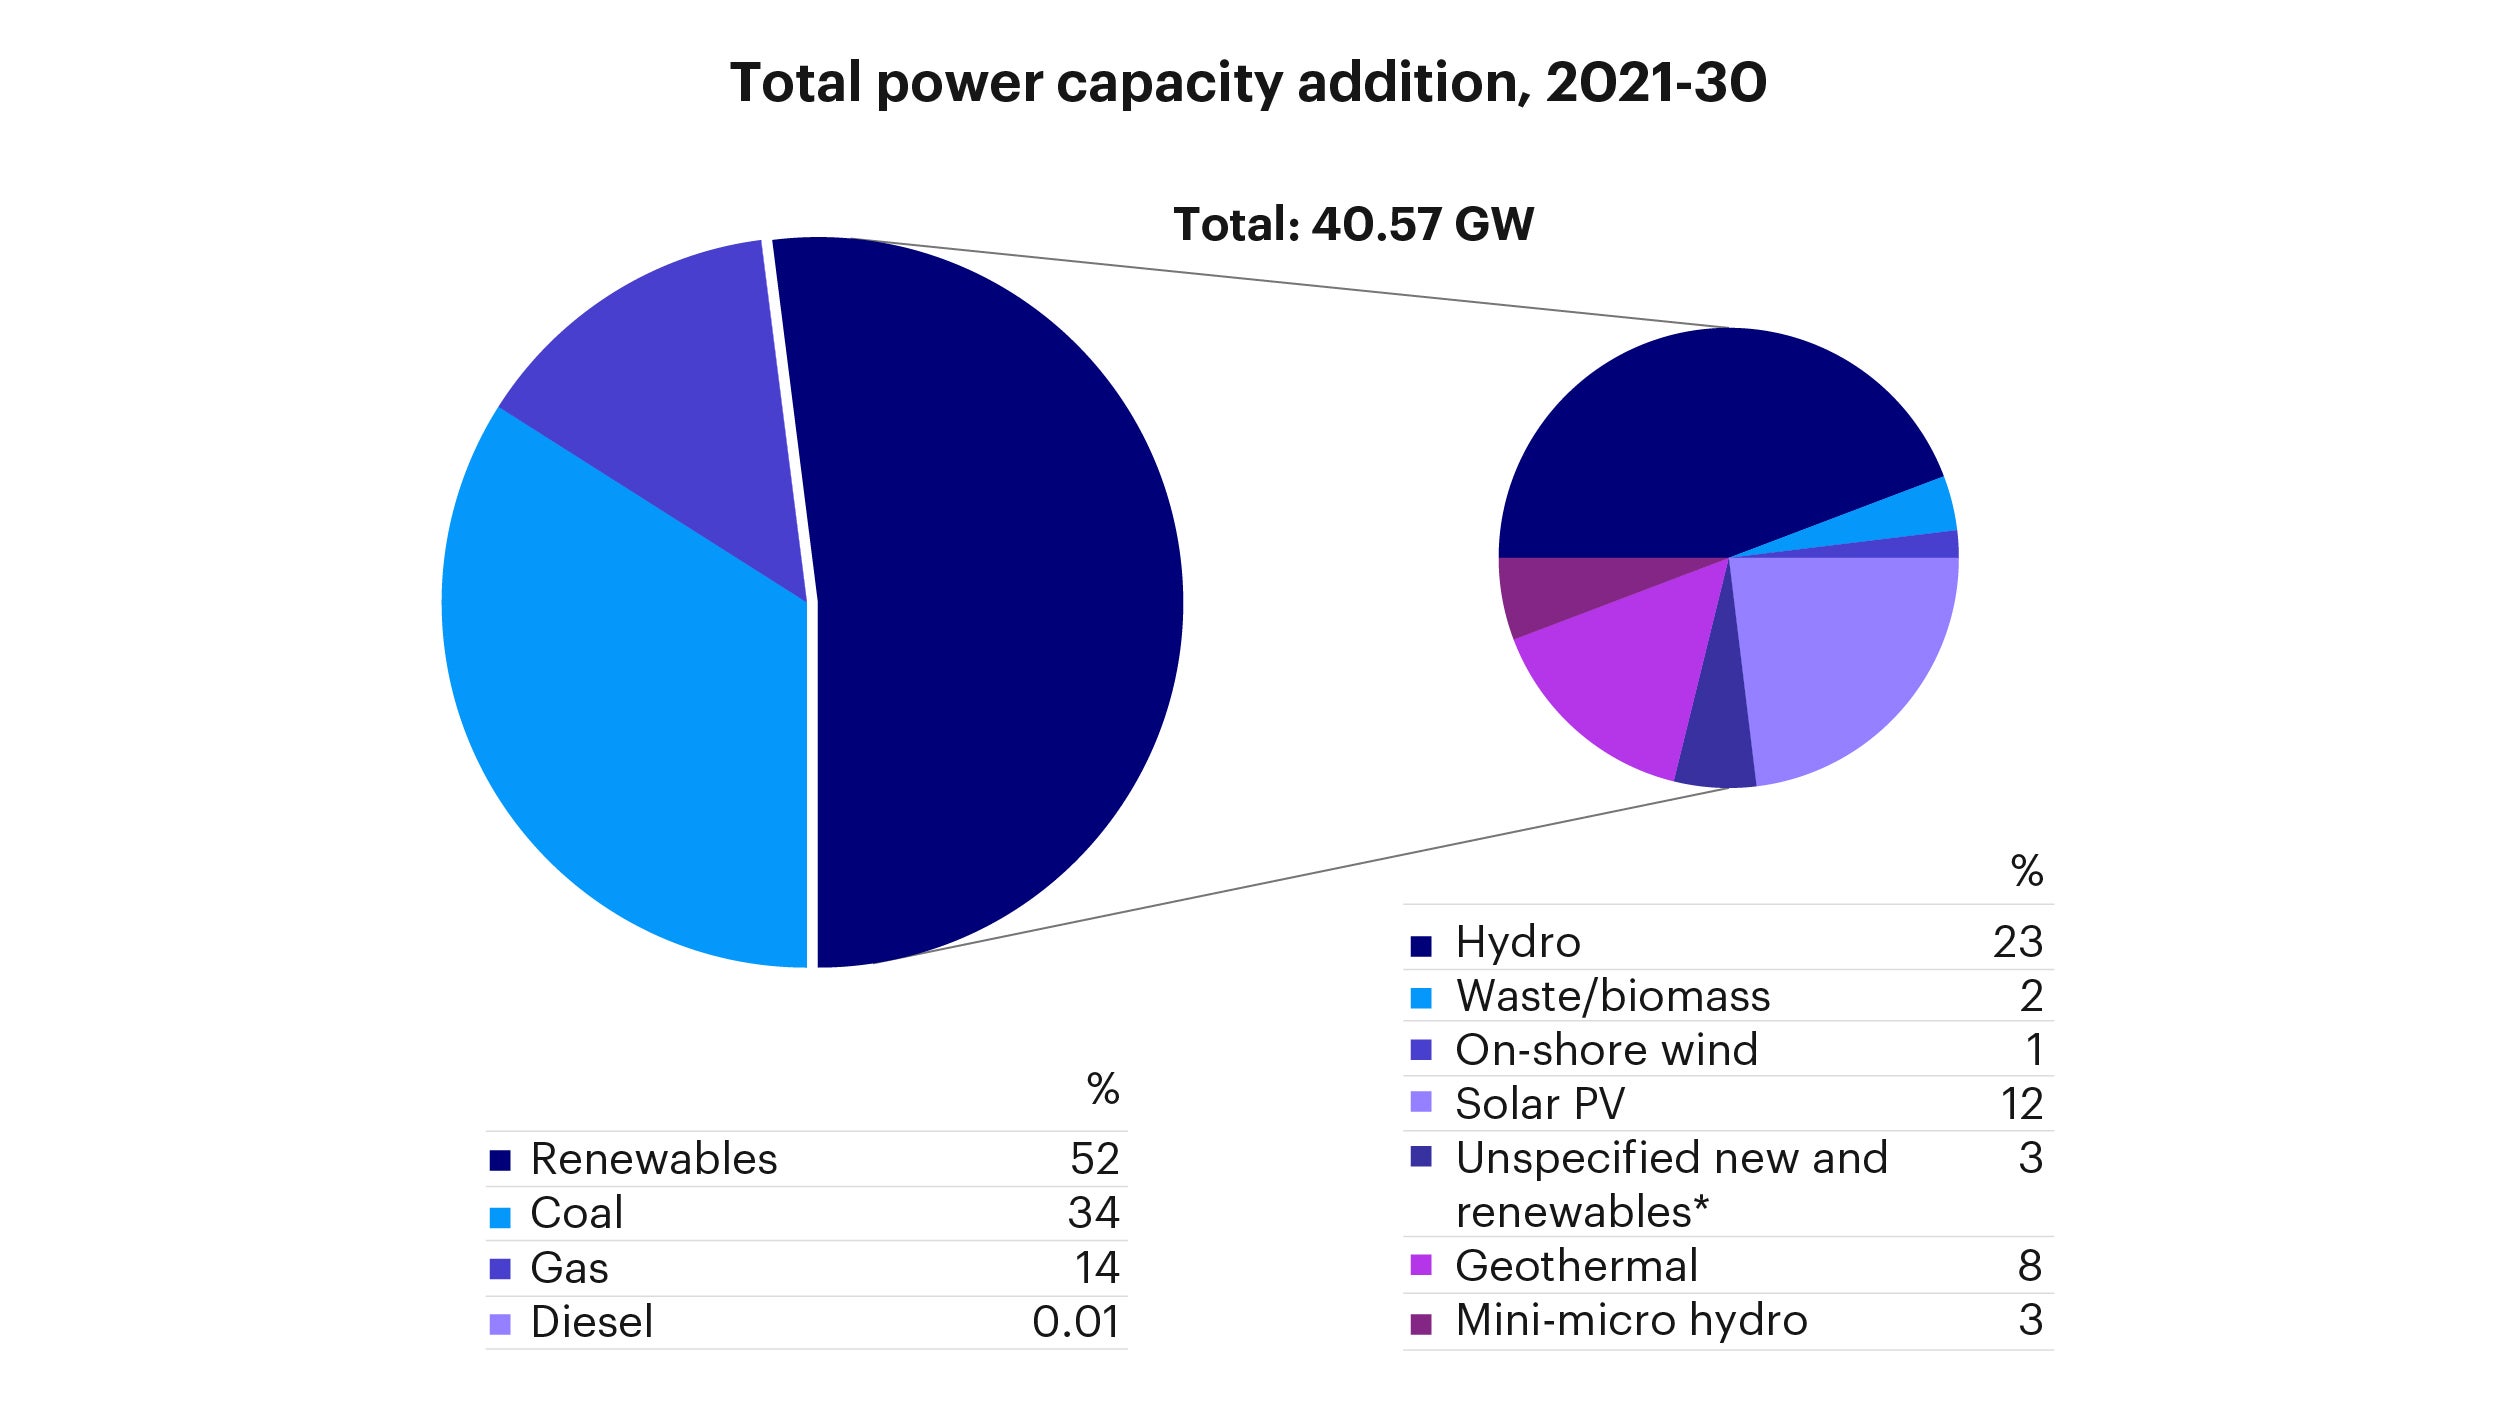 Figure 2: Renewables account for half of Indonesia’s total power capacity addition